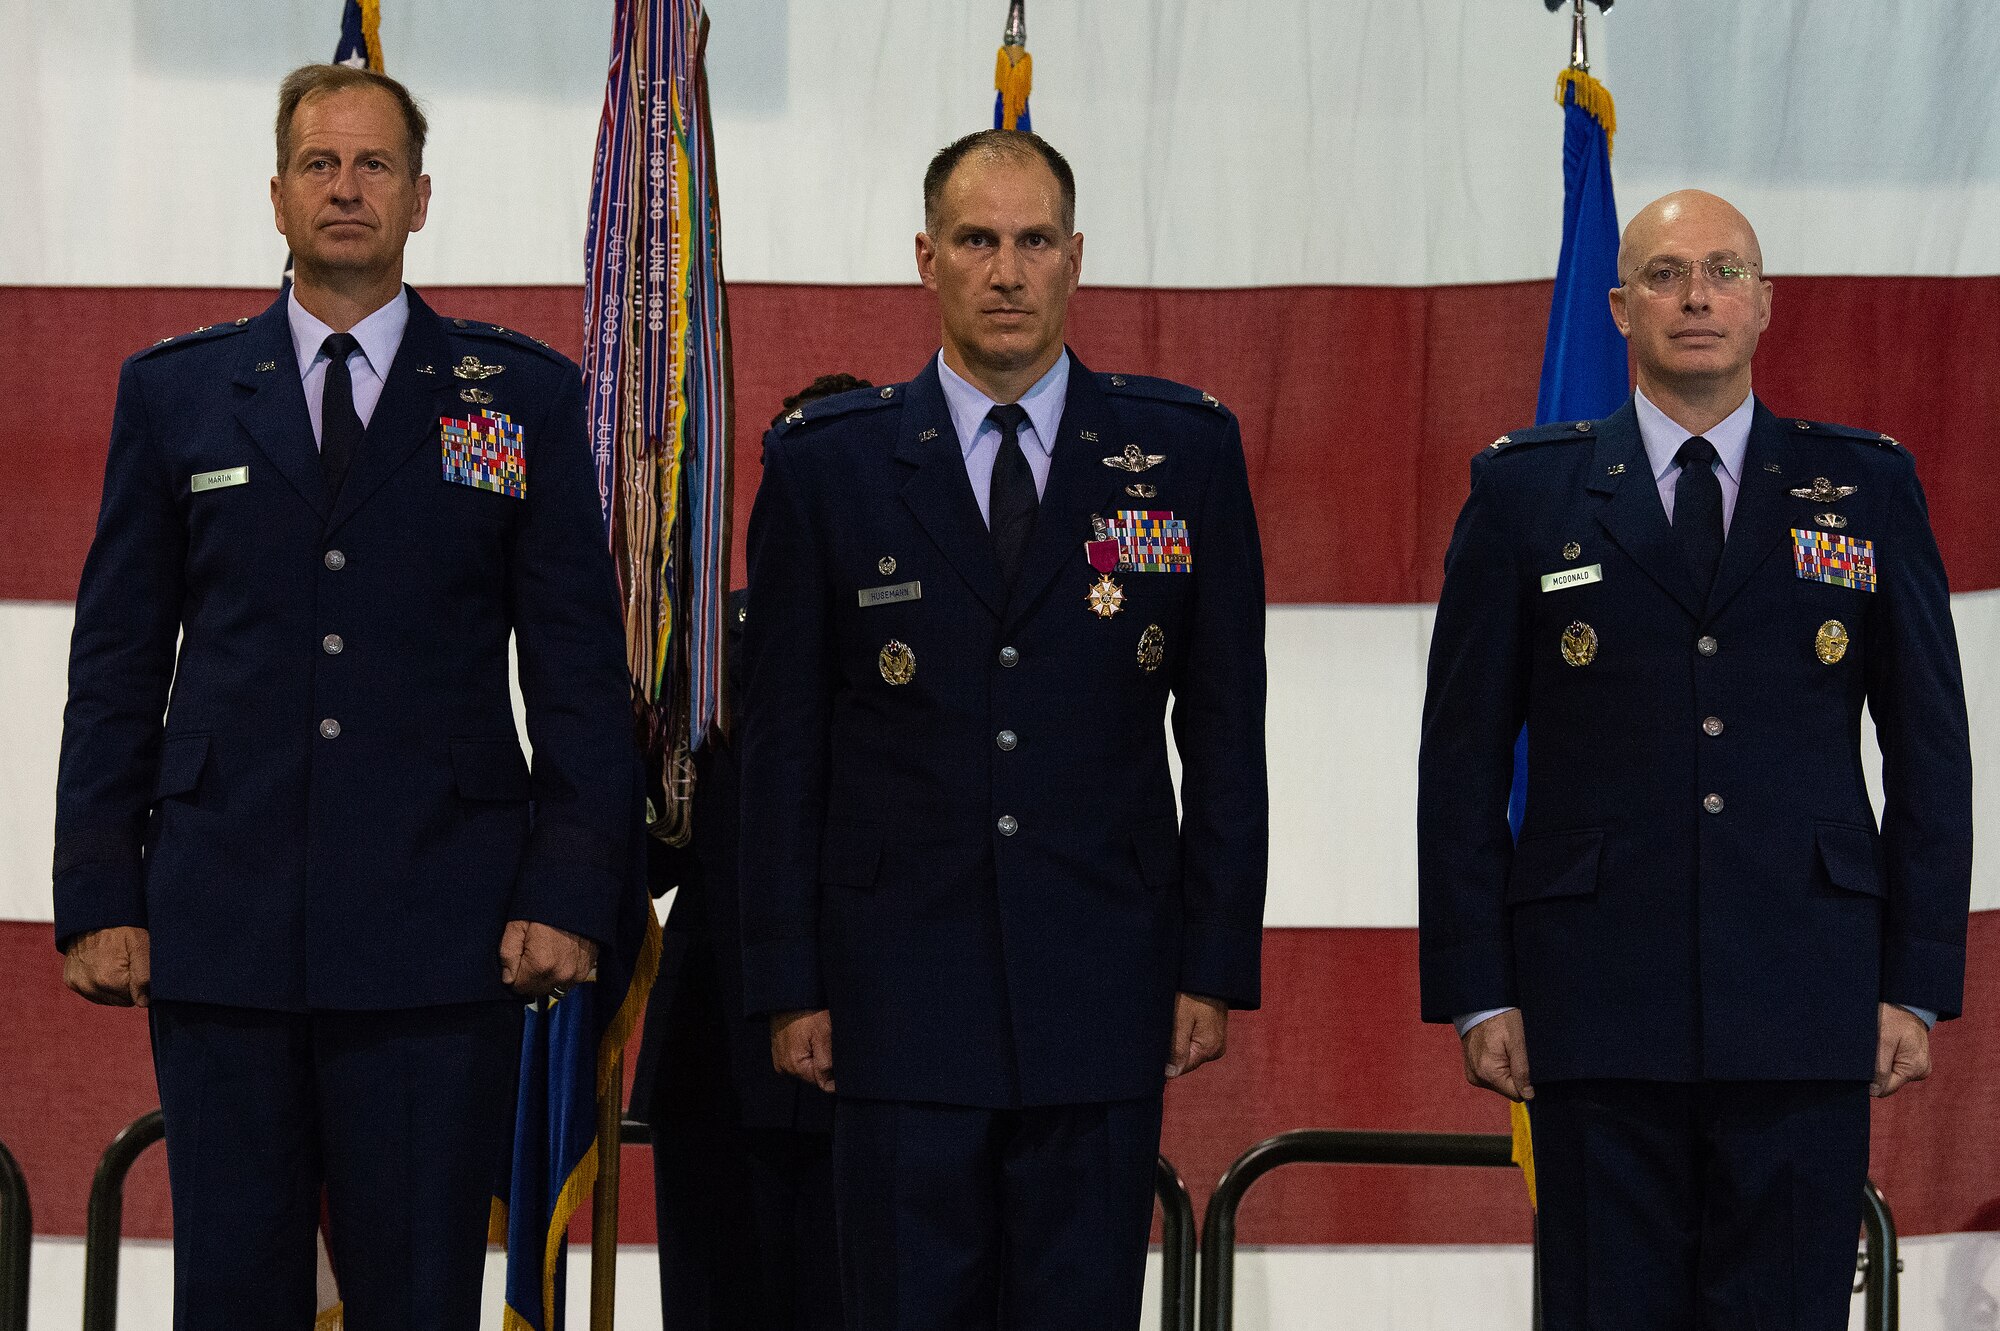 From left, Maj. Gen. Corey J. Martin, 18th Air Force commander, Col. Matthew S. Husemann, outgoing 436th Airlift Wing commander, and Col. William C. McDonald, incoming 436th AW commander, stand at attention during the 436th AW Change of Command ceremony at Dover Air Force Base, Delaware, July 7, 2023. Husemann relinquished command to McDonald in a ceremony attended by family, friends, distinguished visitors, local civic leaders and members of Team Dover. (U.S. Air Force photo by Roland Balik)